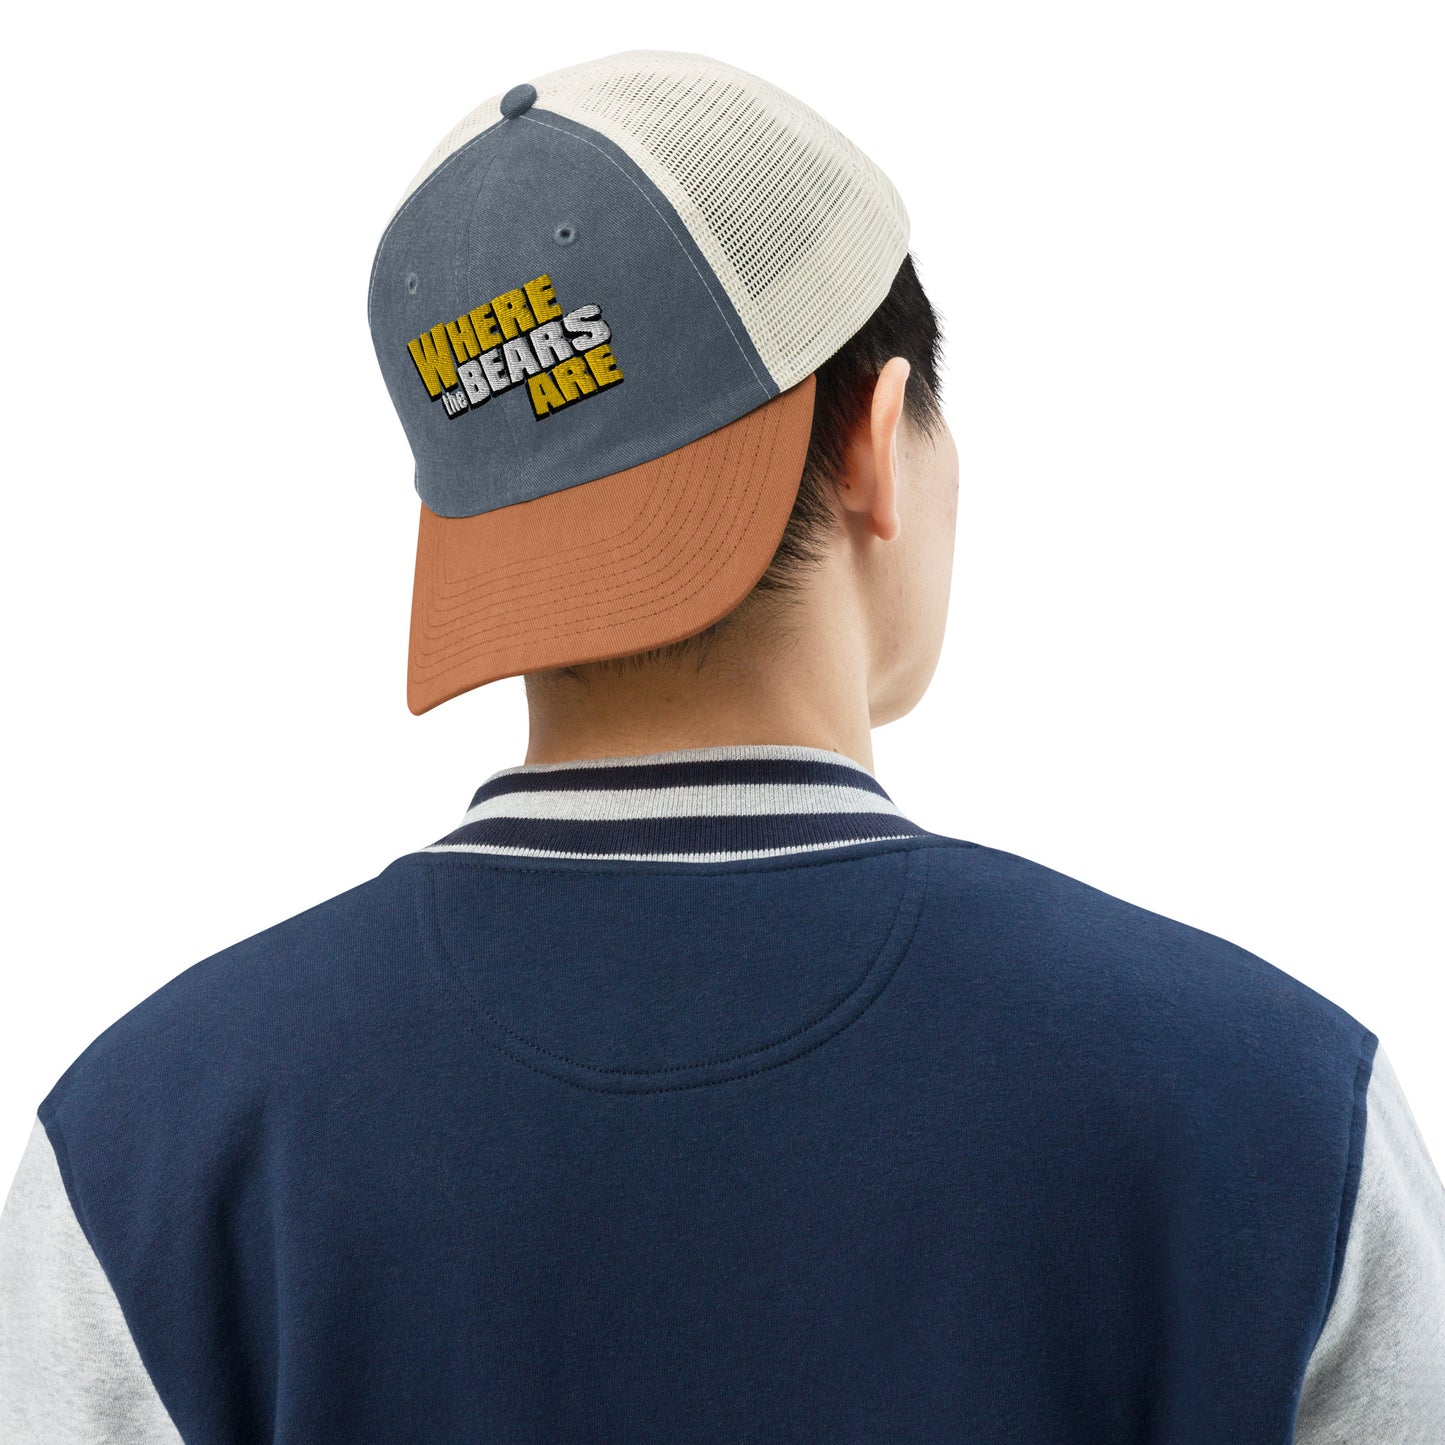 'Where The Bears Are' Embroidered Logo Pigment-dyed cap